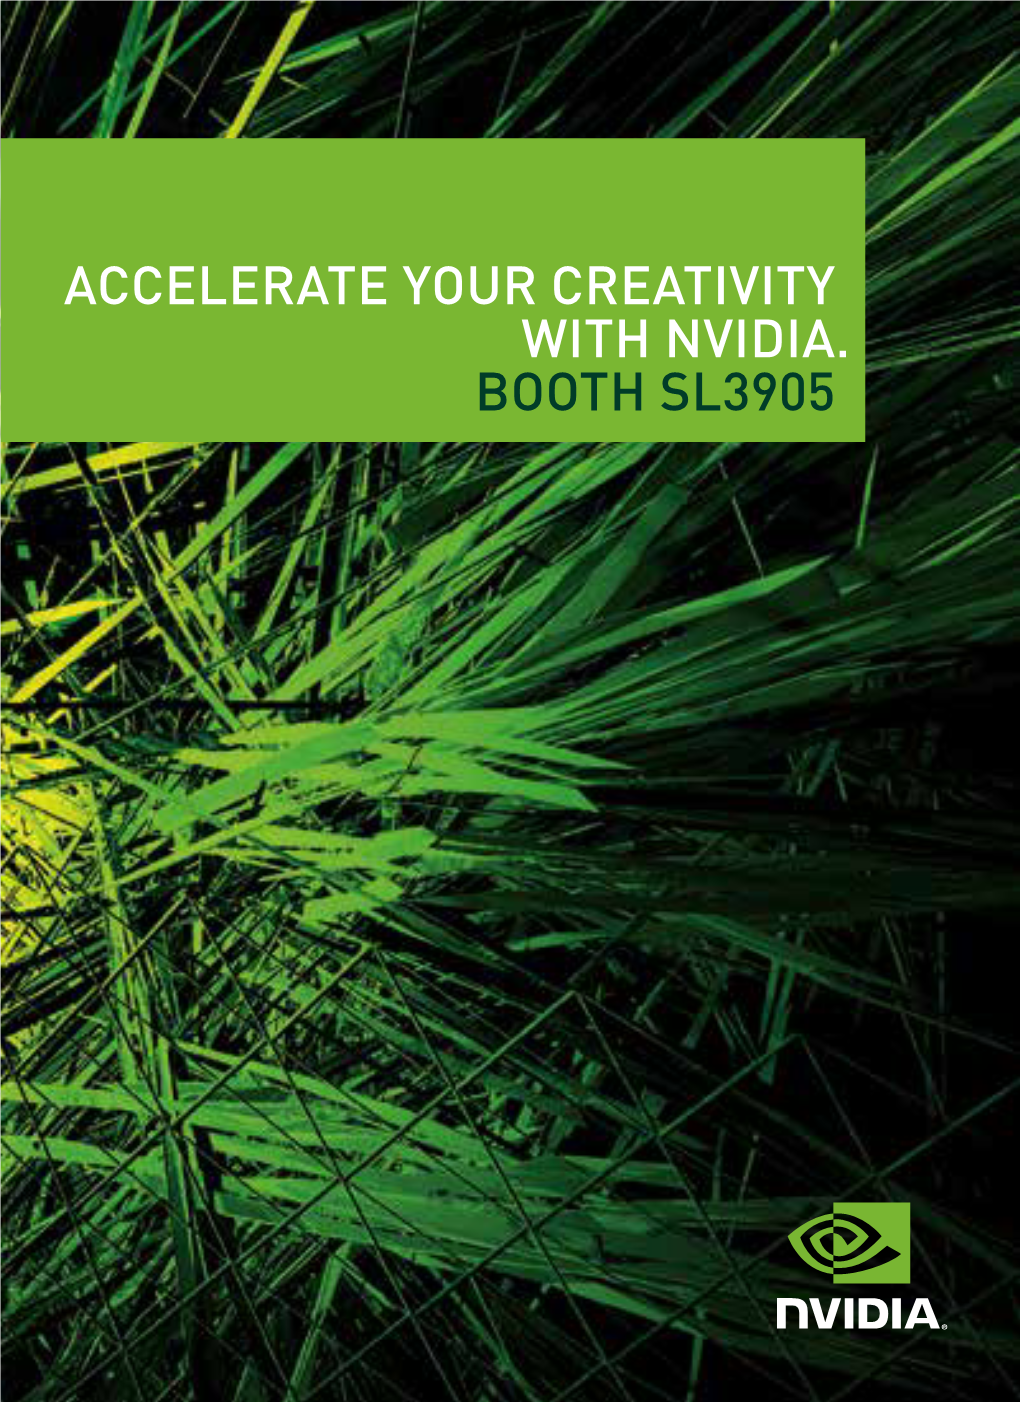 Accelerate Your Creativity with Nvidia BOOTH Sl3905